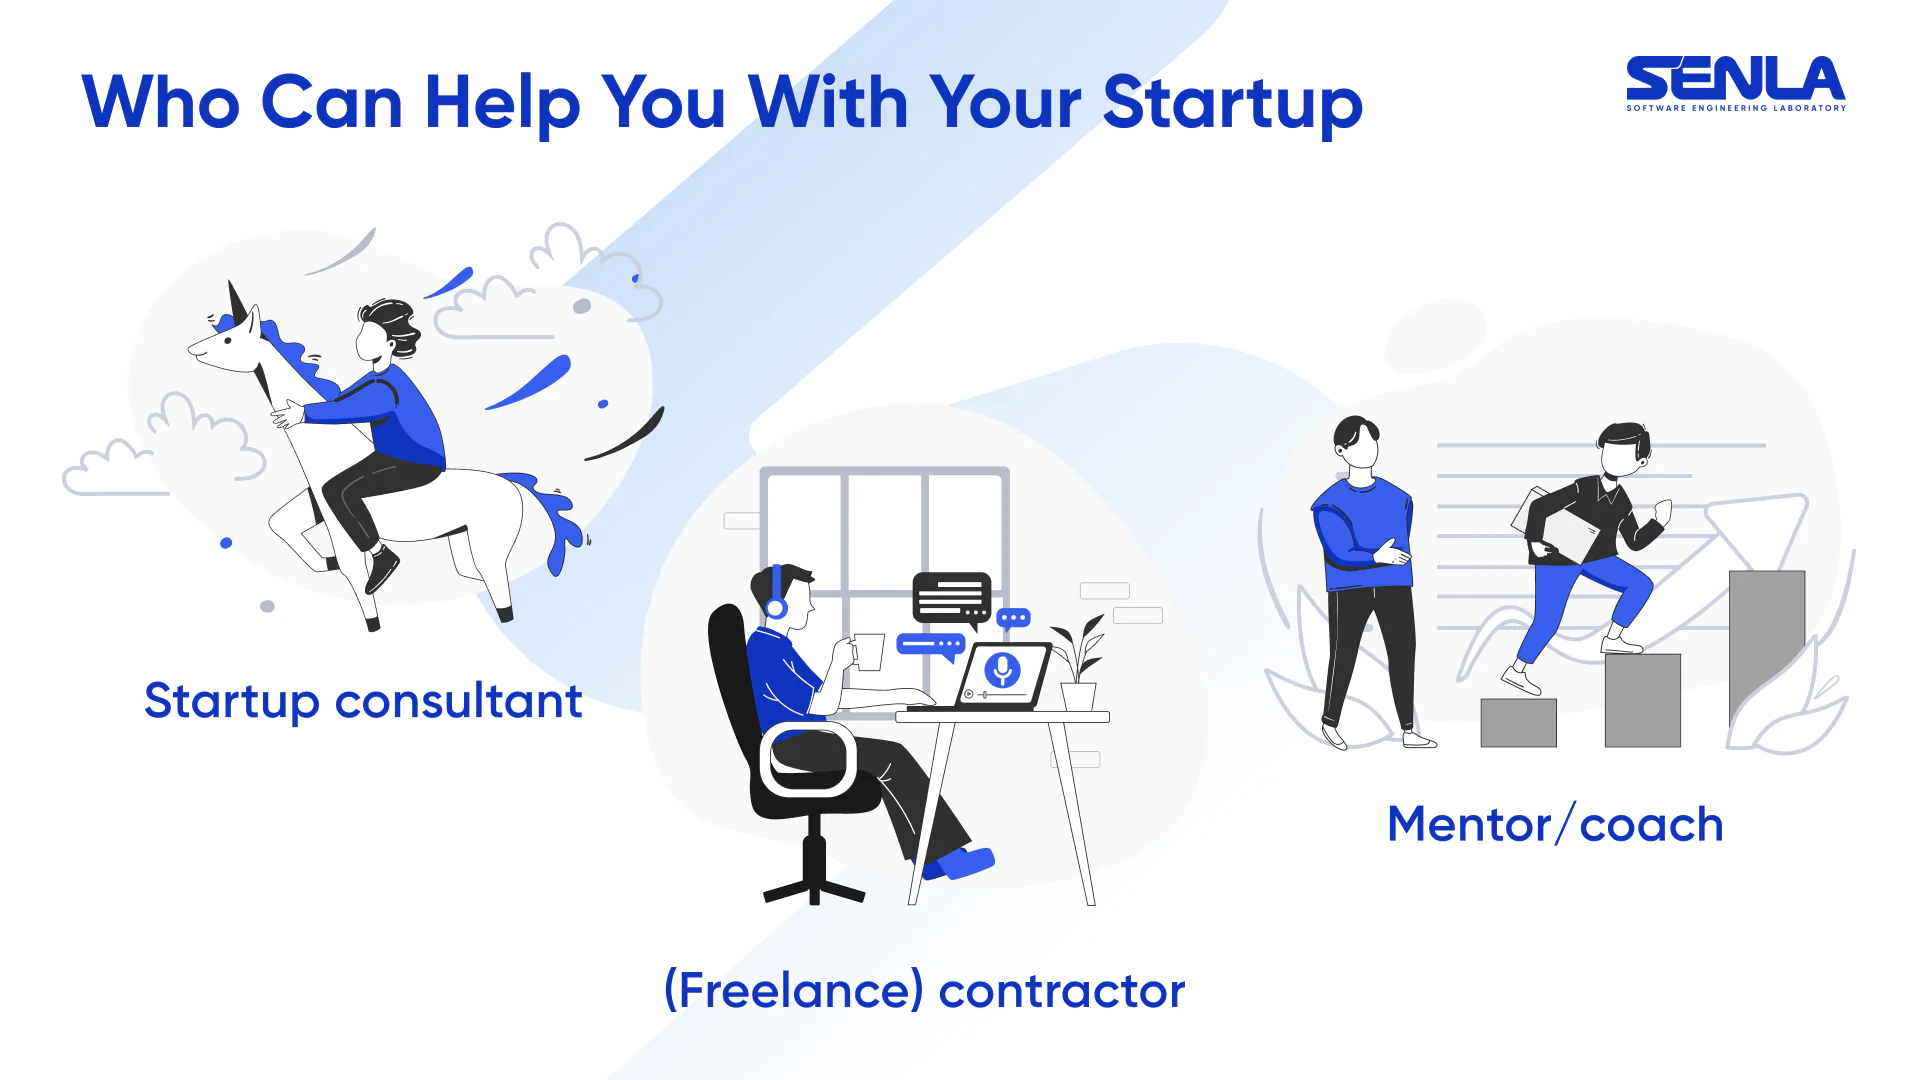 Who can help you with your startup